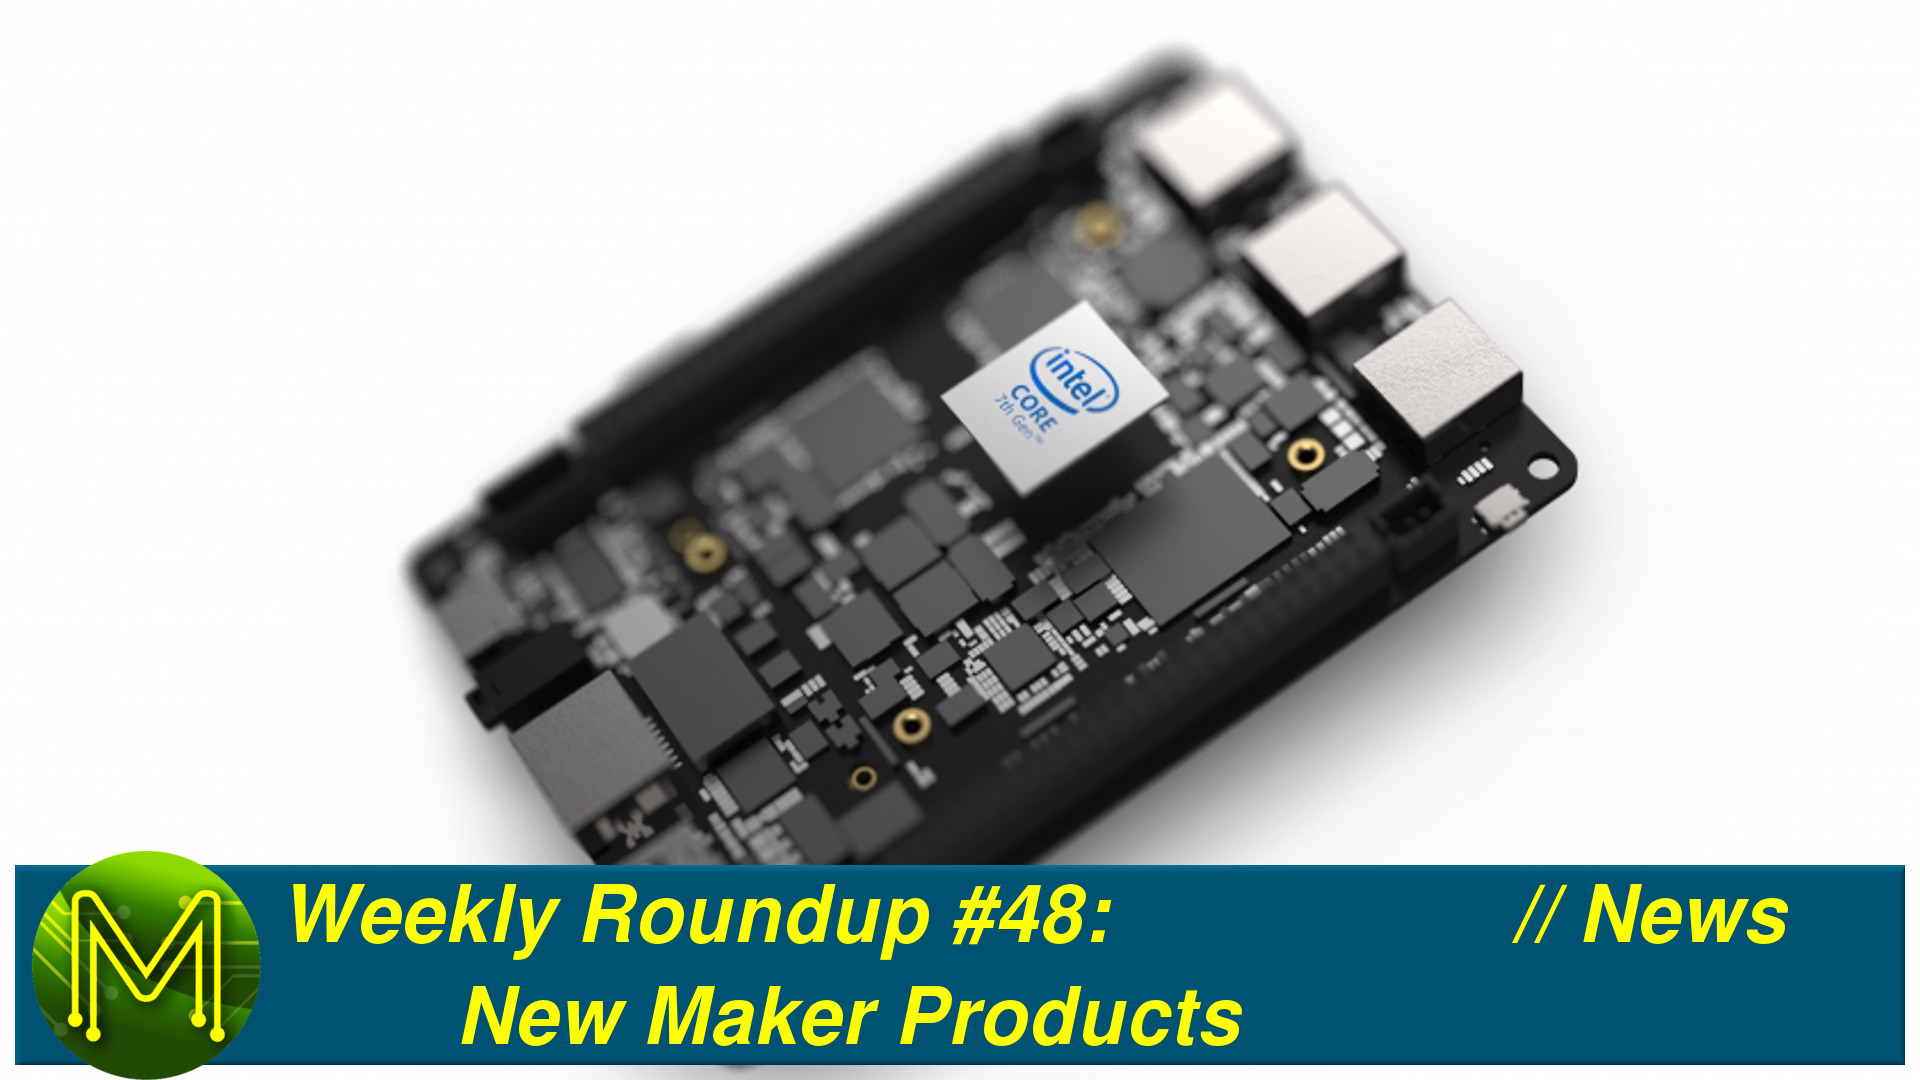 Weekly Roundup #48 - New Maker Products // News